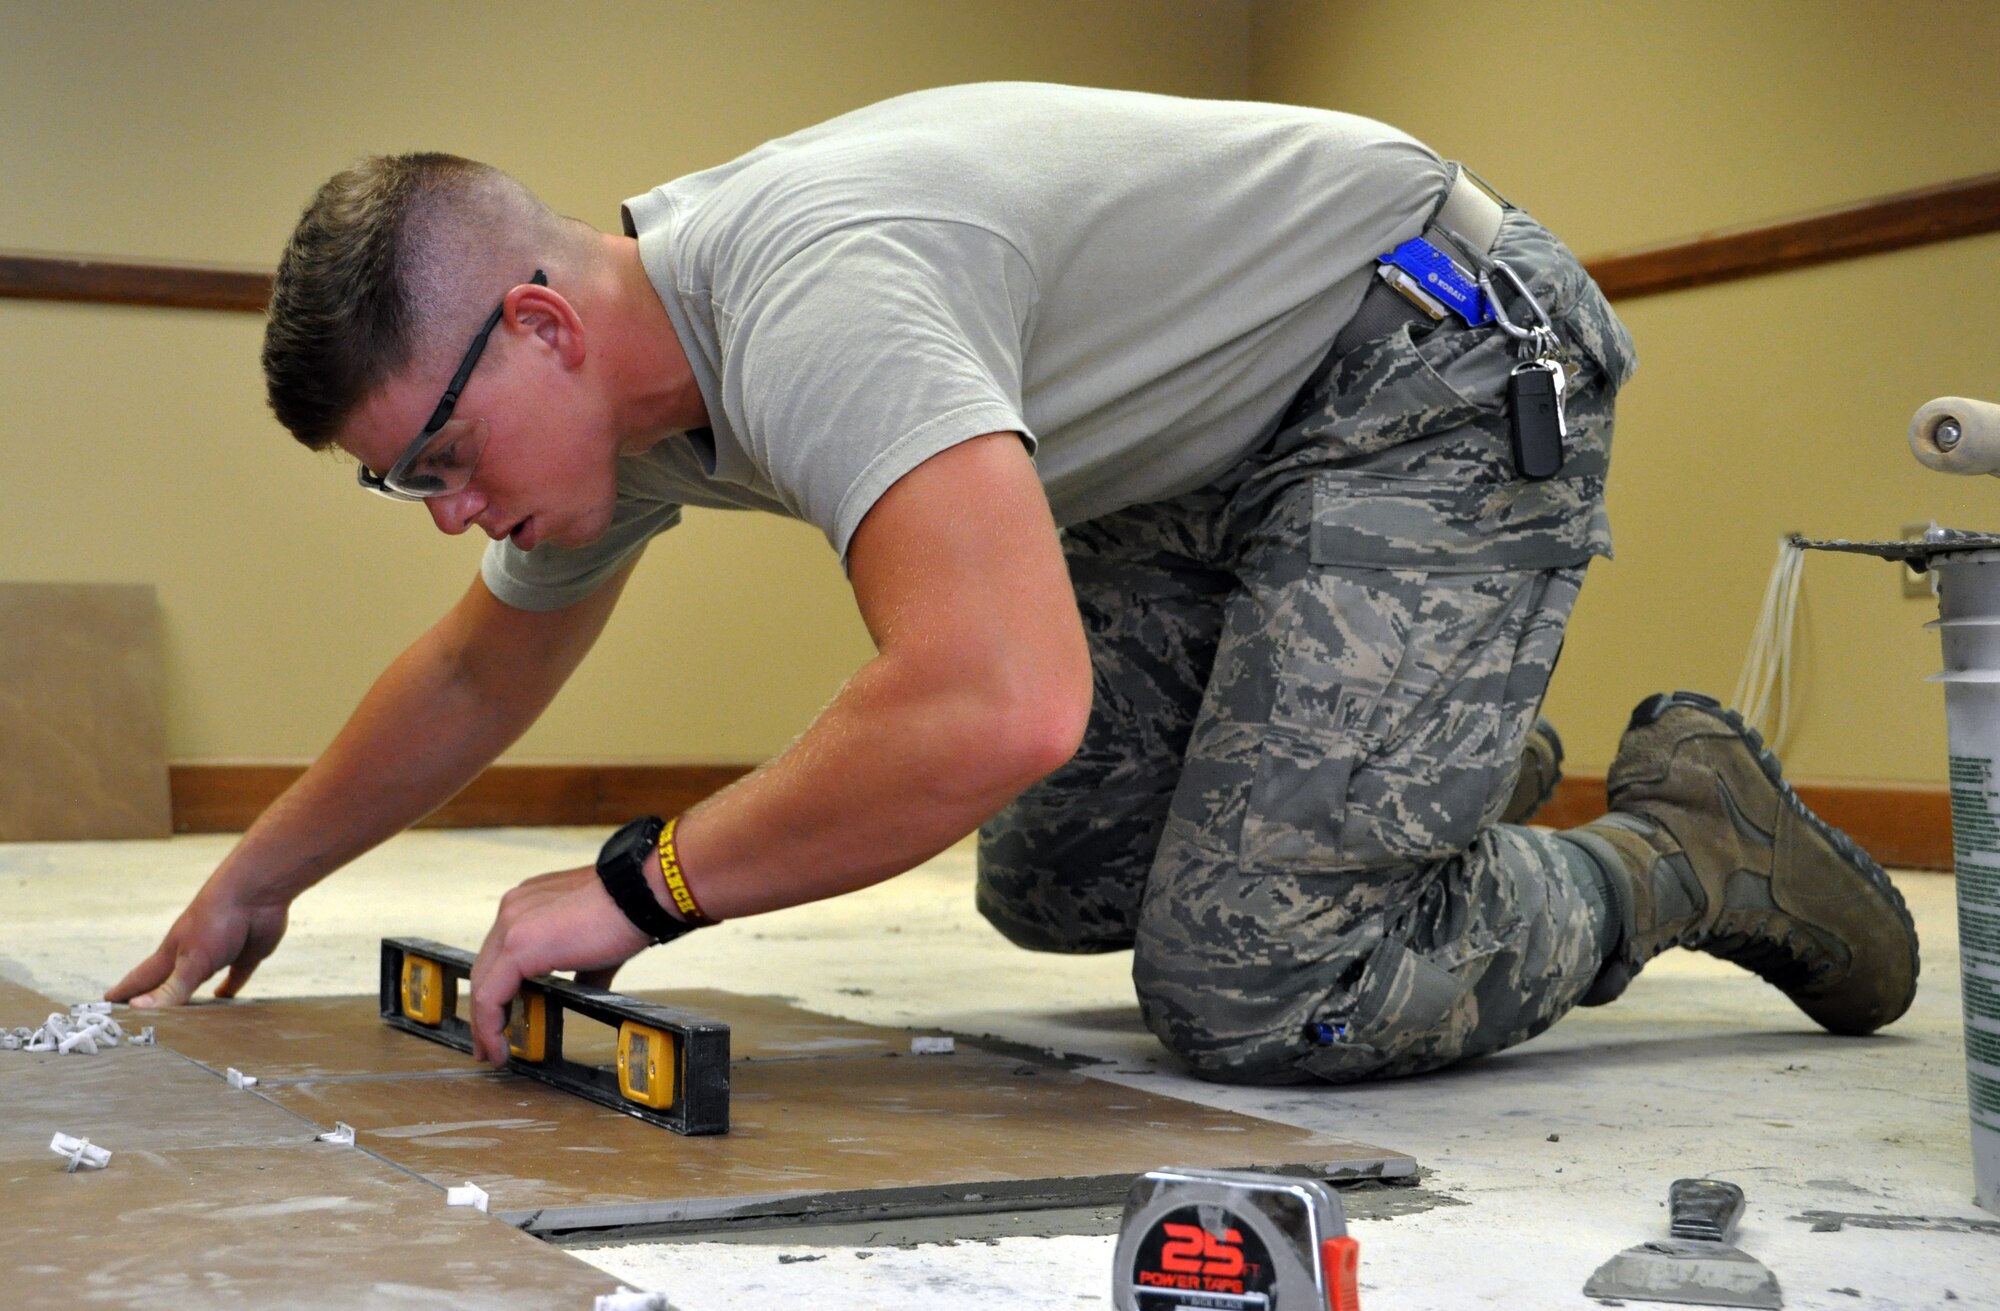 Senior Airman Robert James, 931st Civil Engineer Squadron, uses a bubble level to ensure a newly installed floor tile is level in Building 1218 at McConnell Air Force Base, Kan., July 11, 2014.  James and several other members of the 931 CES spent the July Unit Training Assembly installing new floor tiles in the building as part of a renovation project conducted by Civil Engineer Airmen from both the active-duty 22nd Air Refueling Wing and the Air Force Reserve 931st Air Refueling Group.  ).  931 CES Airmen consistently work together with their active duty counterparts from the 22nd Air Refueling Wing to repair and improve the facilities of McConnell Air Force Base.  (U.S. Air Force photos by Capt. Zach Anderson)